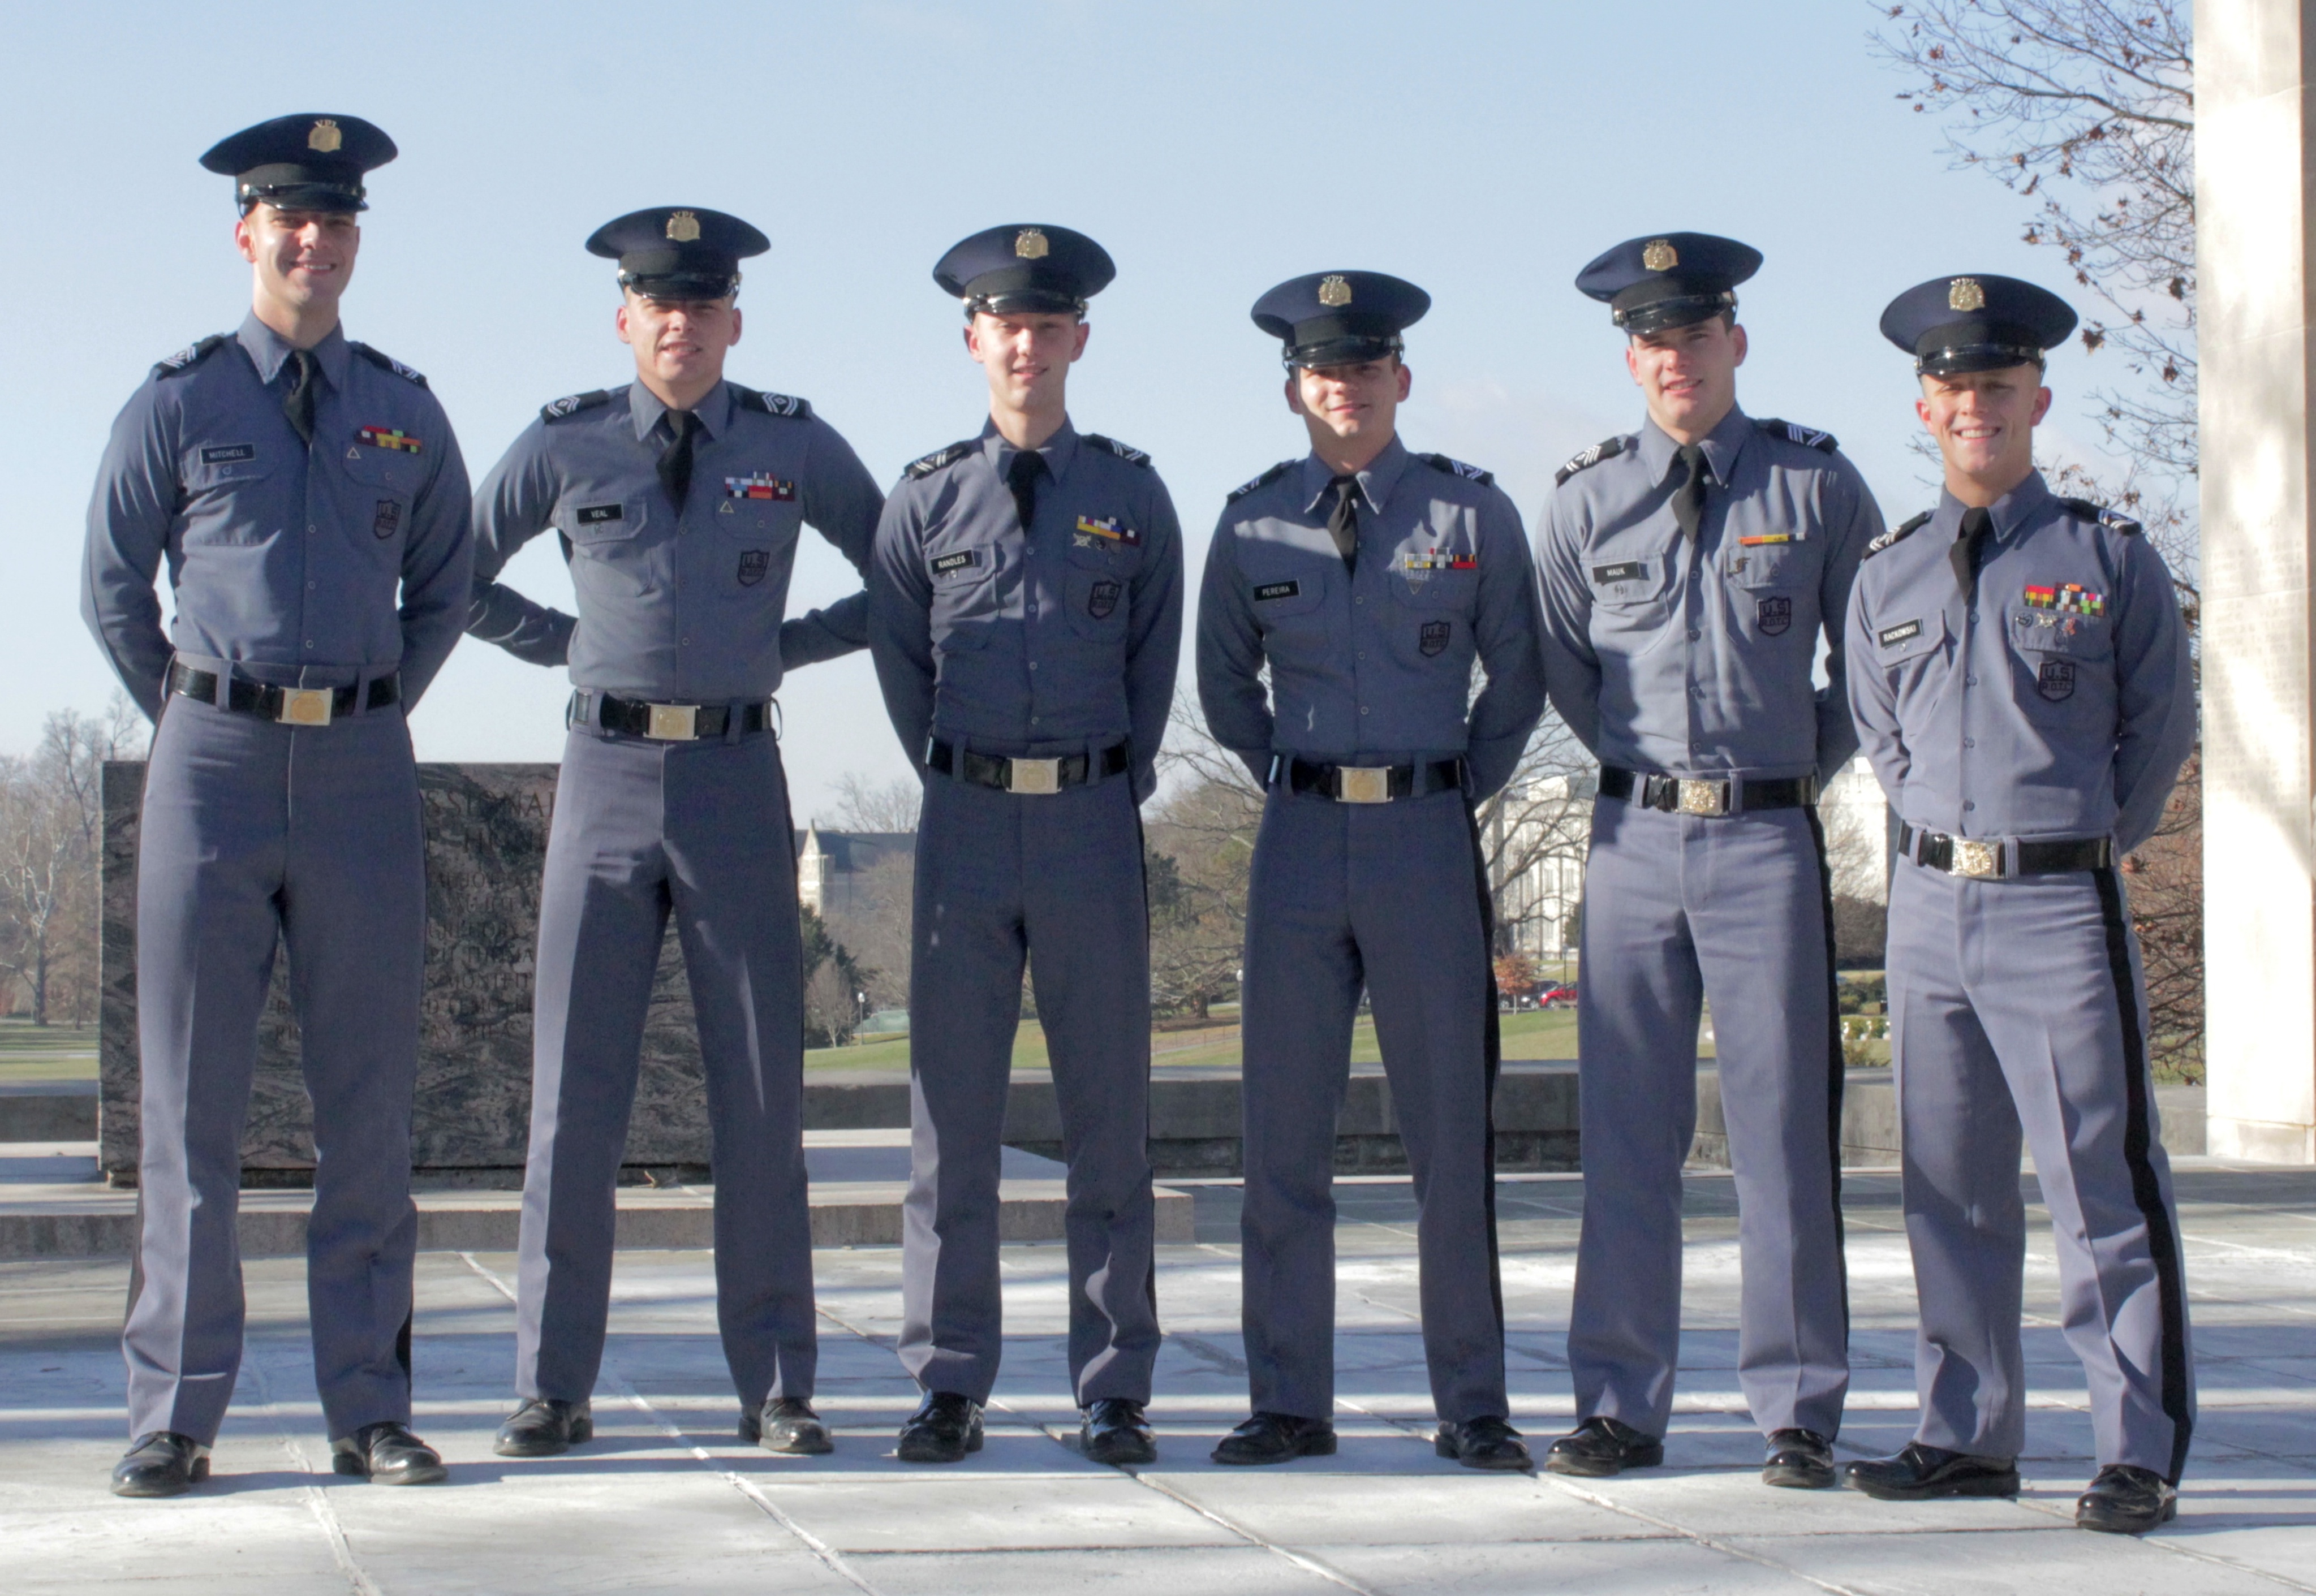 From left to right are members of the Virginia Tech Corps of Cadets Color Guard Cadets Cory Mitchell, Cameron Veal, Tyler Randles, Raymond Pereira, Logan Mauk, and Tim Rackowski standing in front of the Pylons.